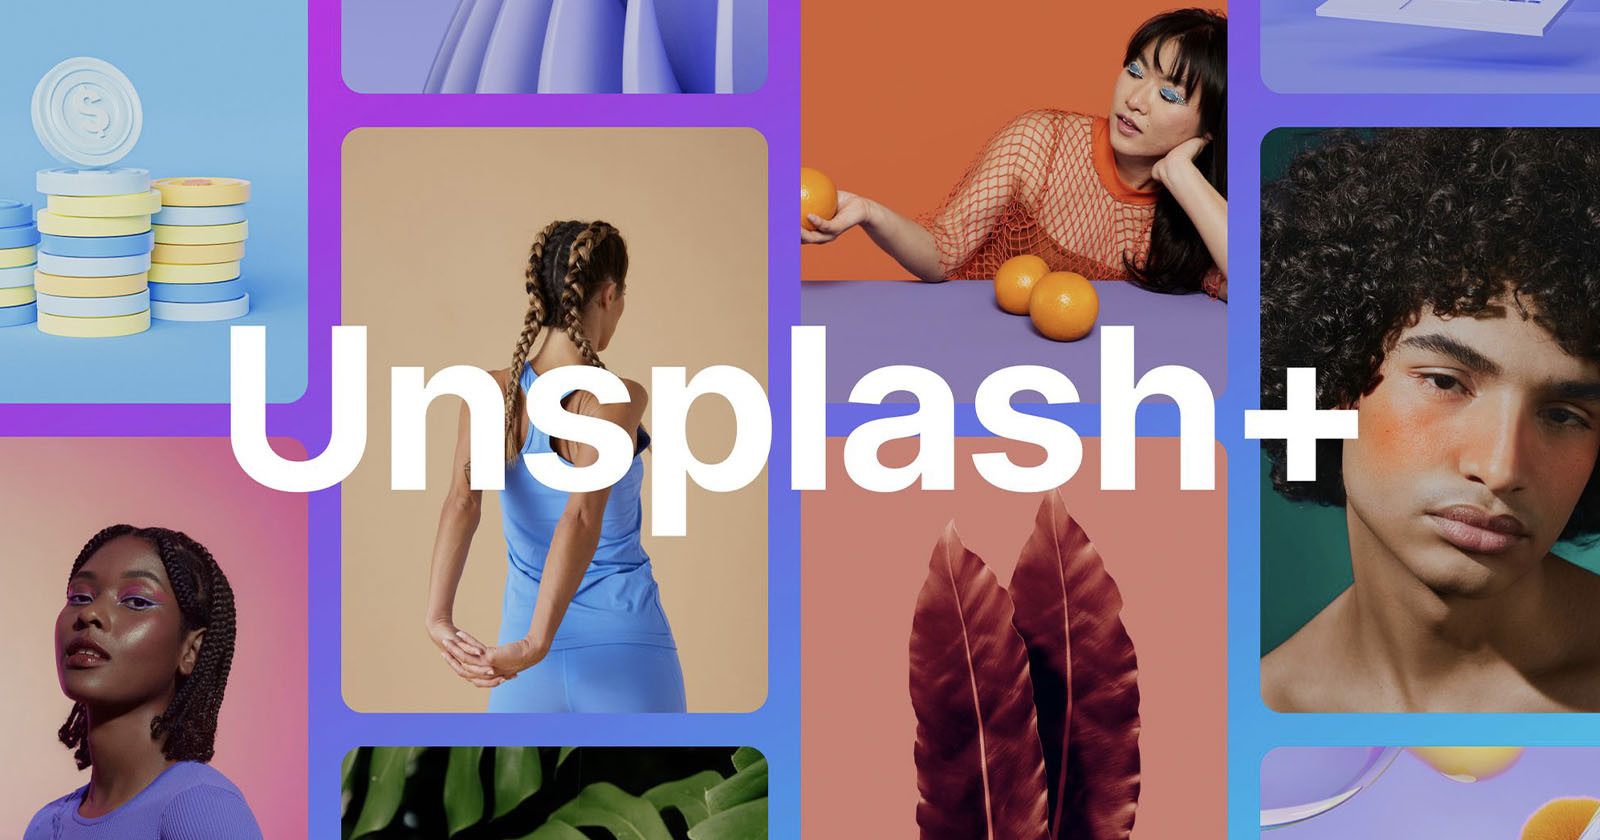  unsplash adds paid tier one year after getty 